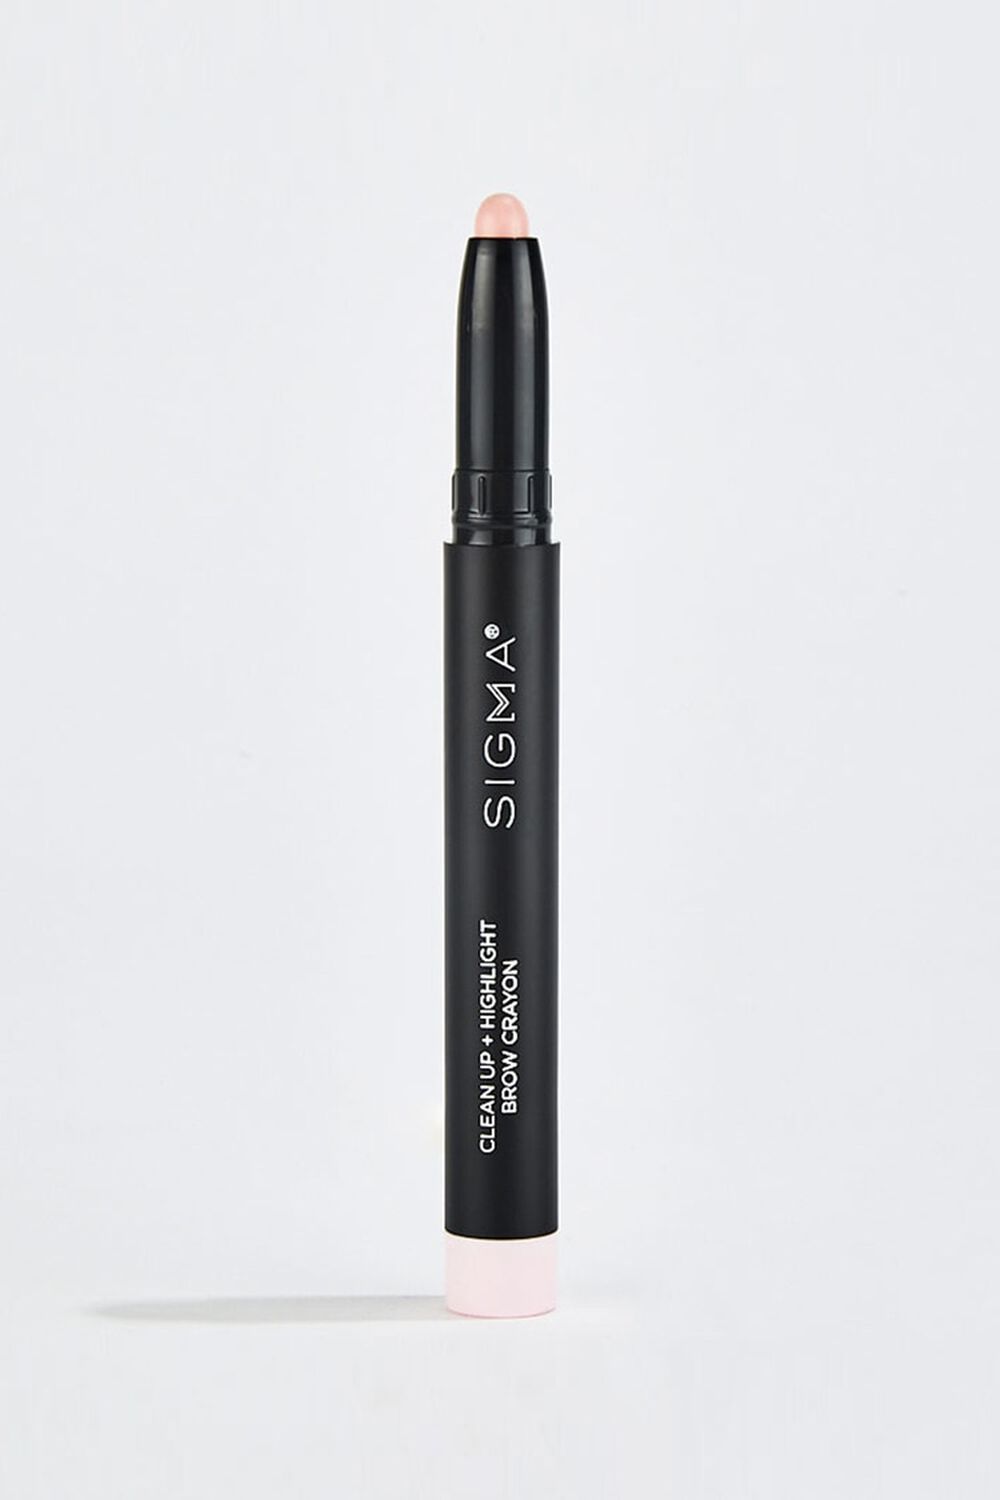 PINK Sigma Beauty Clean Up & Highlight Brow Crayon, image 1